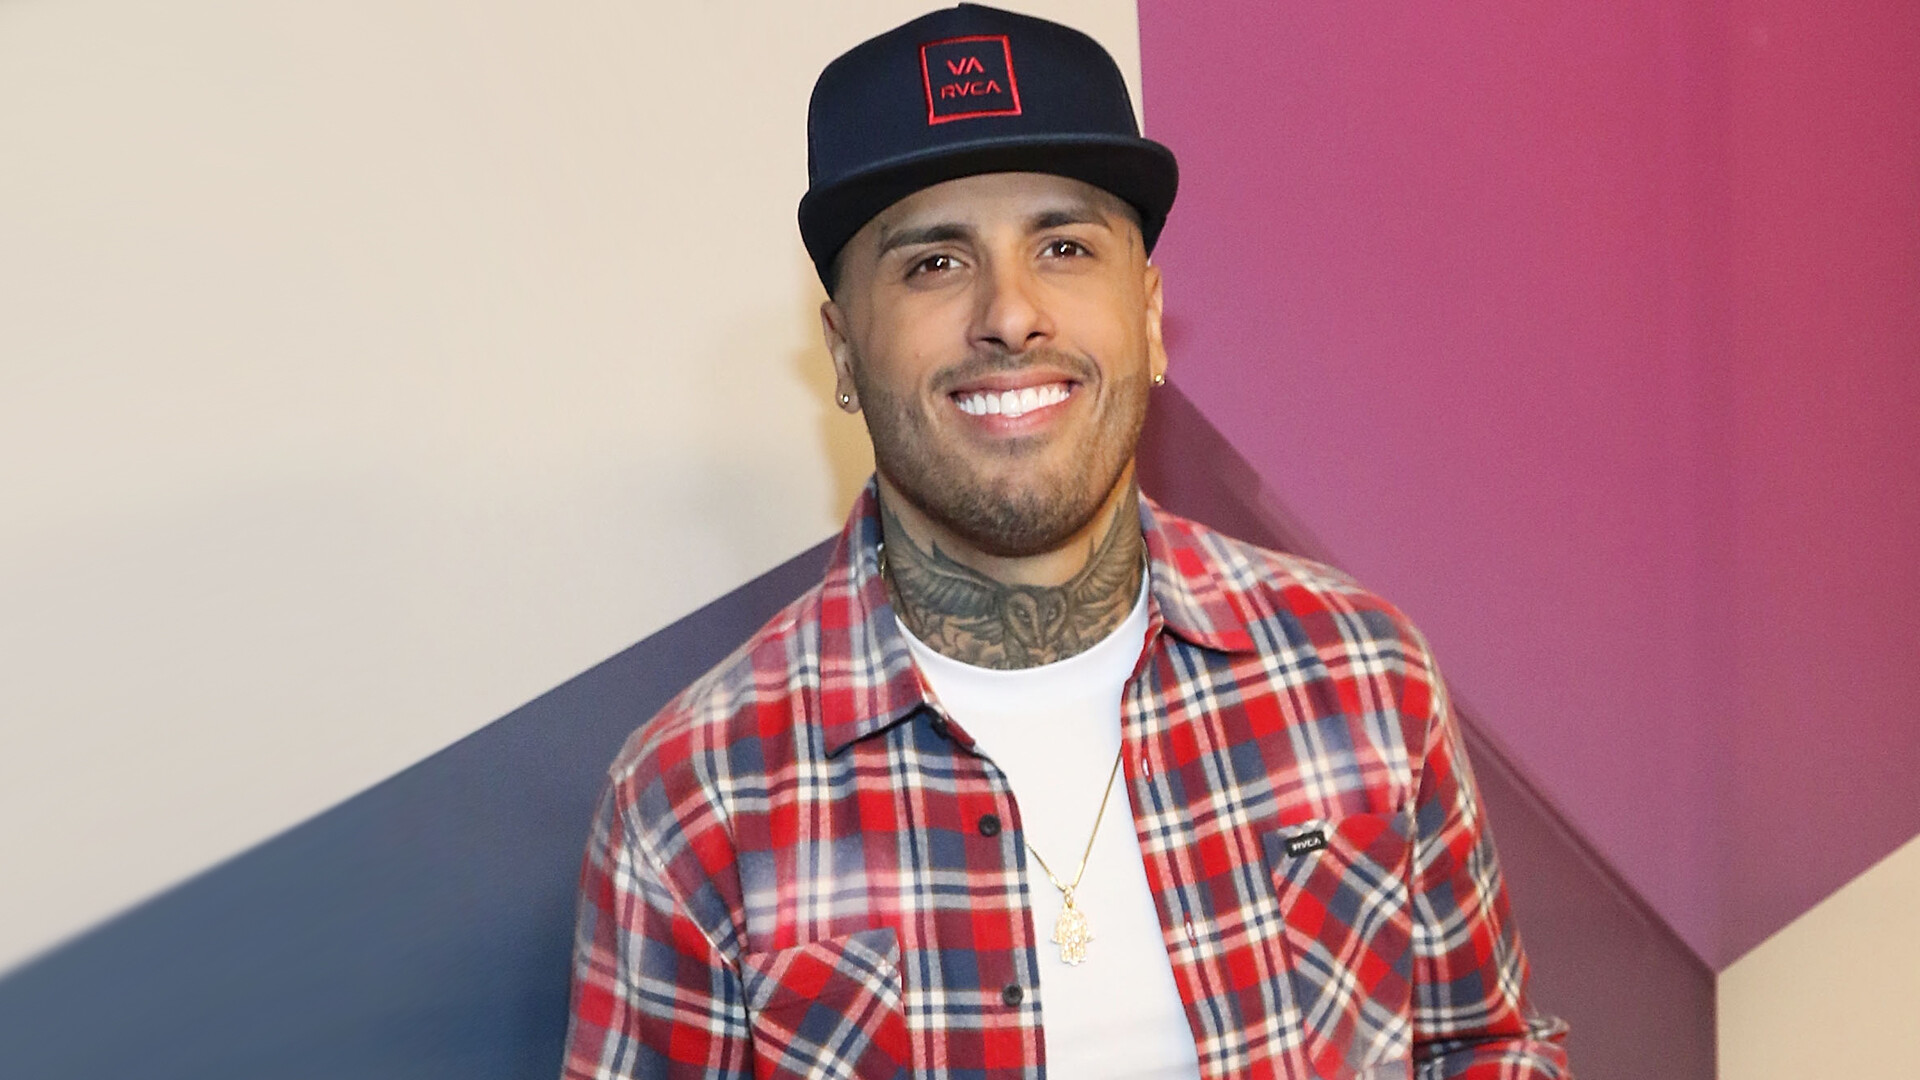 Nicky Jam download, User submission, Music discovery, Samantha Mercado, 1920x1080 Full HD Desktop